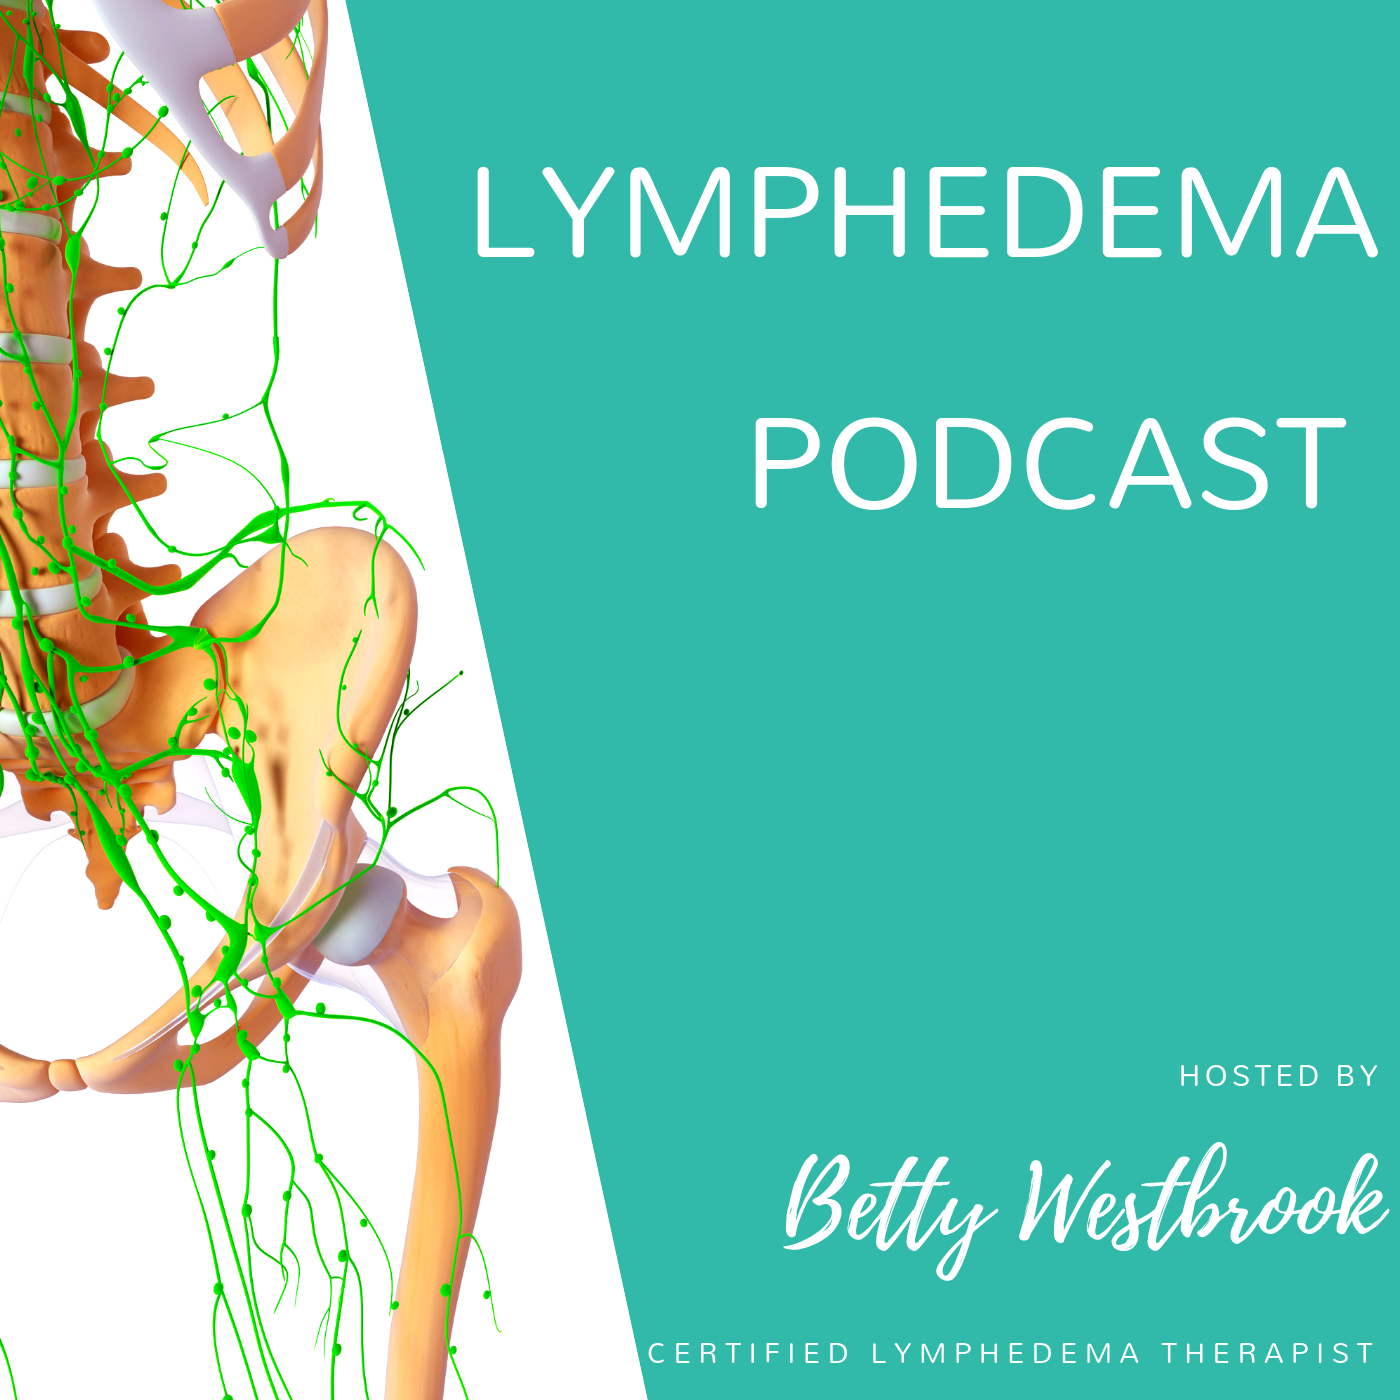 Lymphedema Podcast